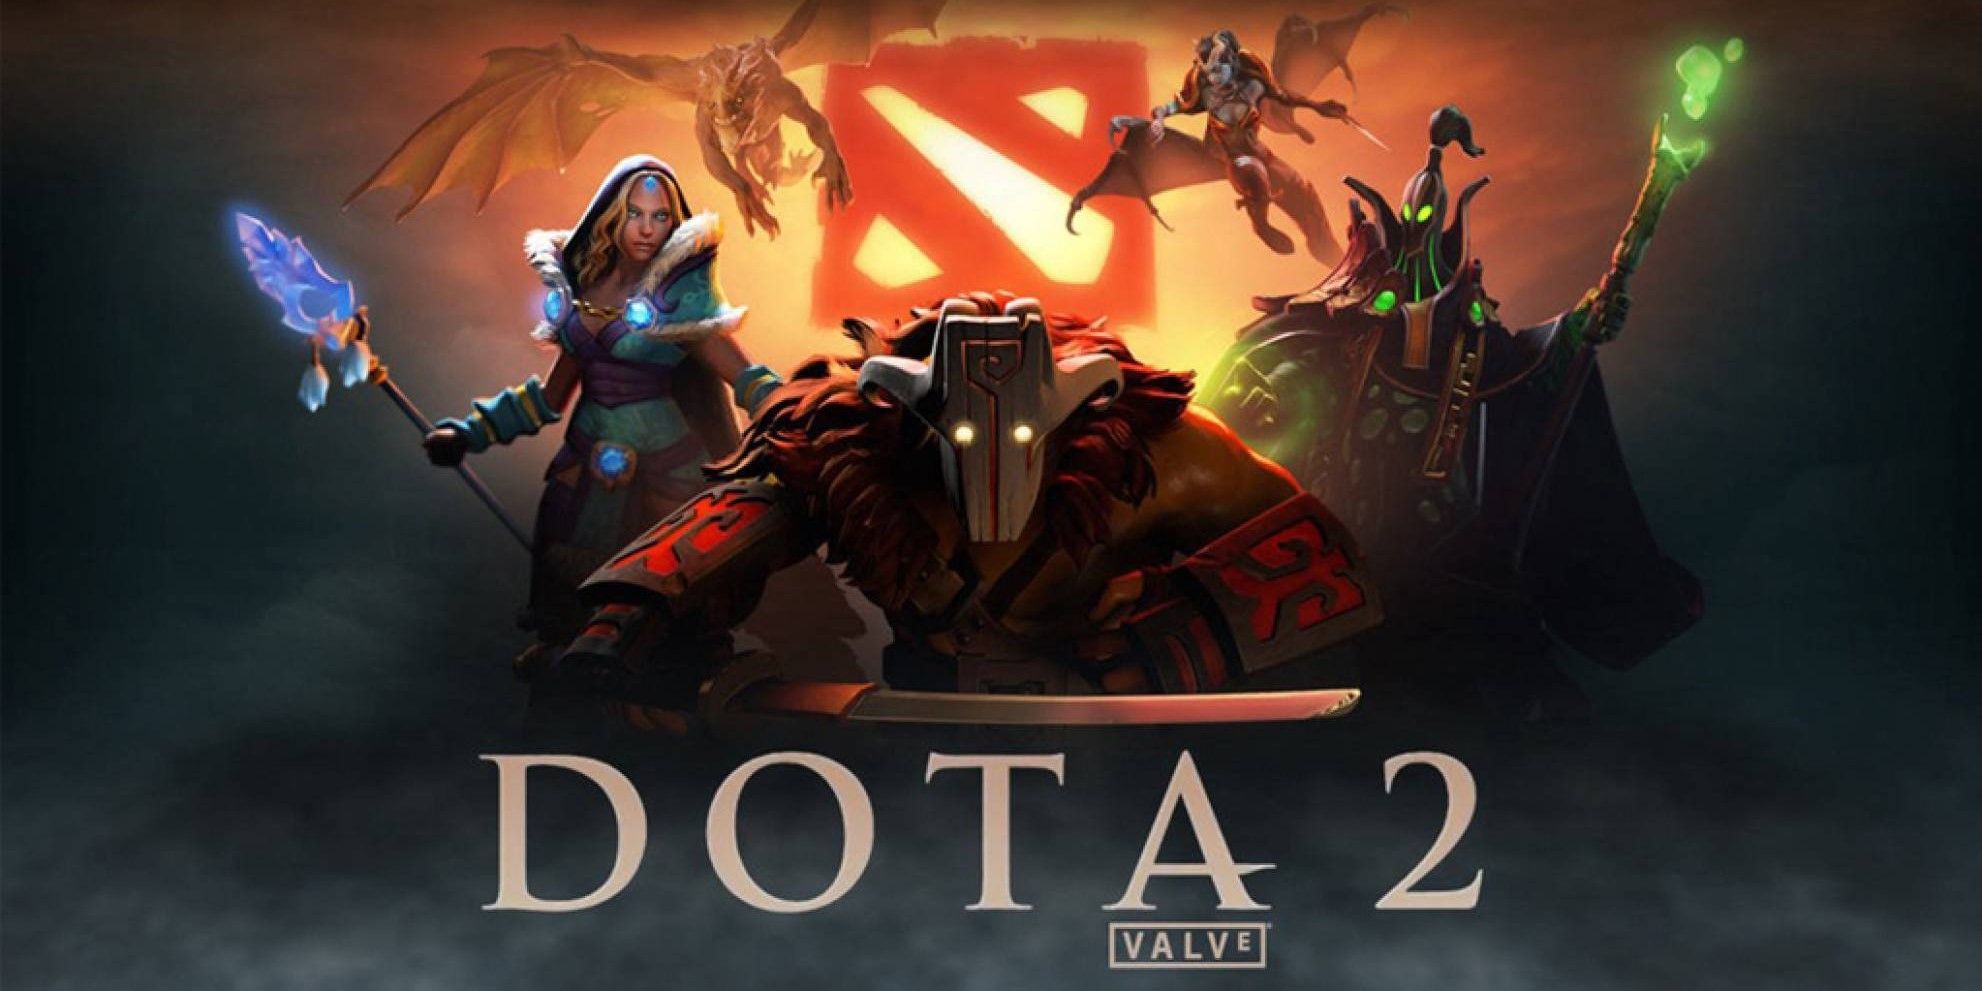 The titlecard for Dota 2.